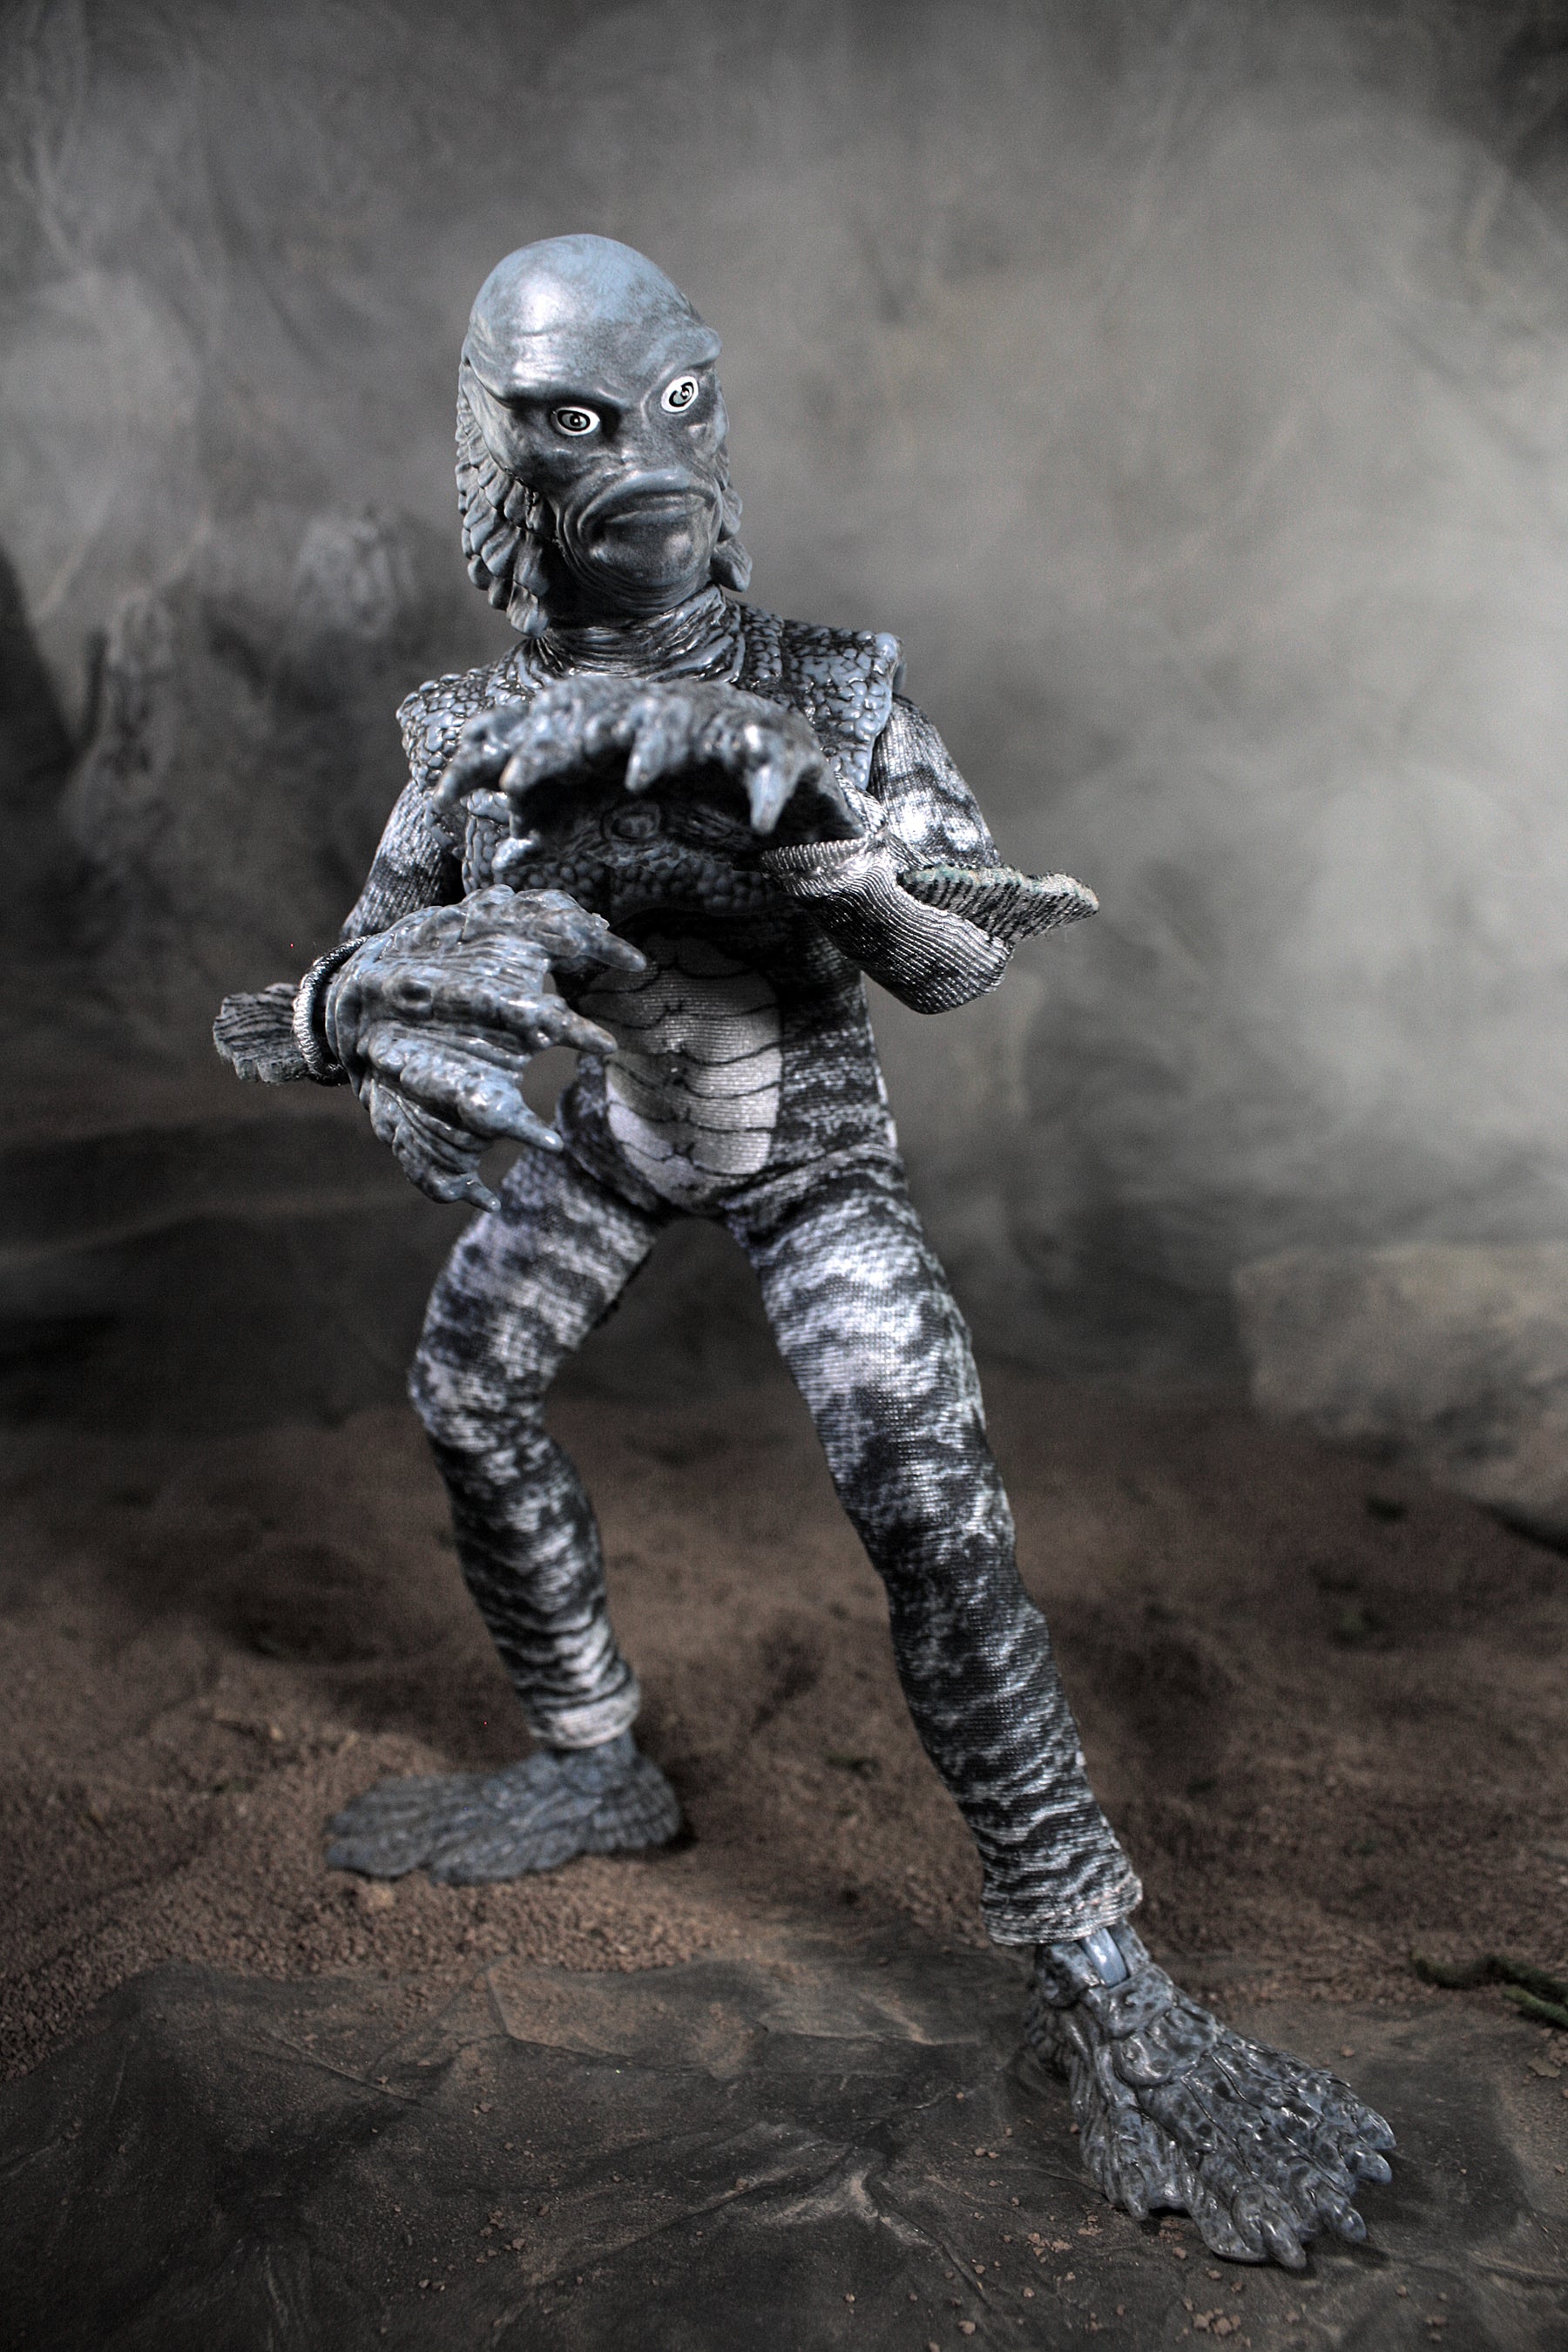 Mego Horror Wave 14 - B&W Creature from the Black Lagoon 8" Action Figure